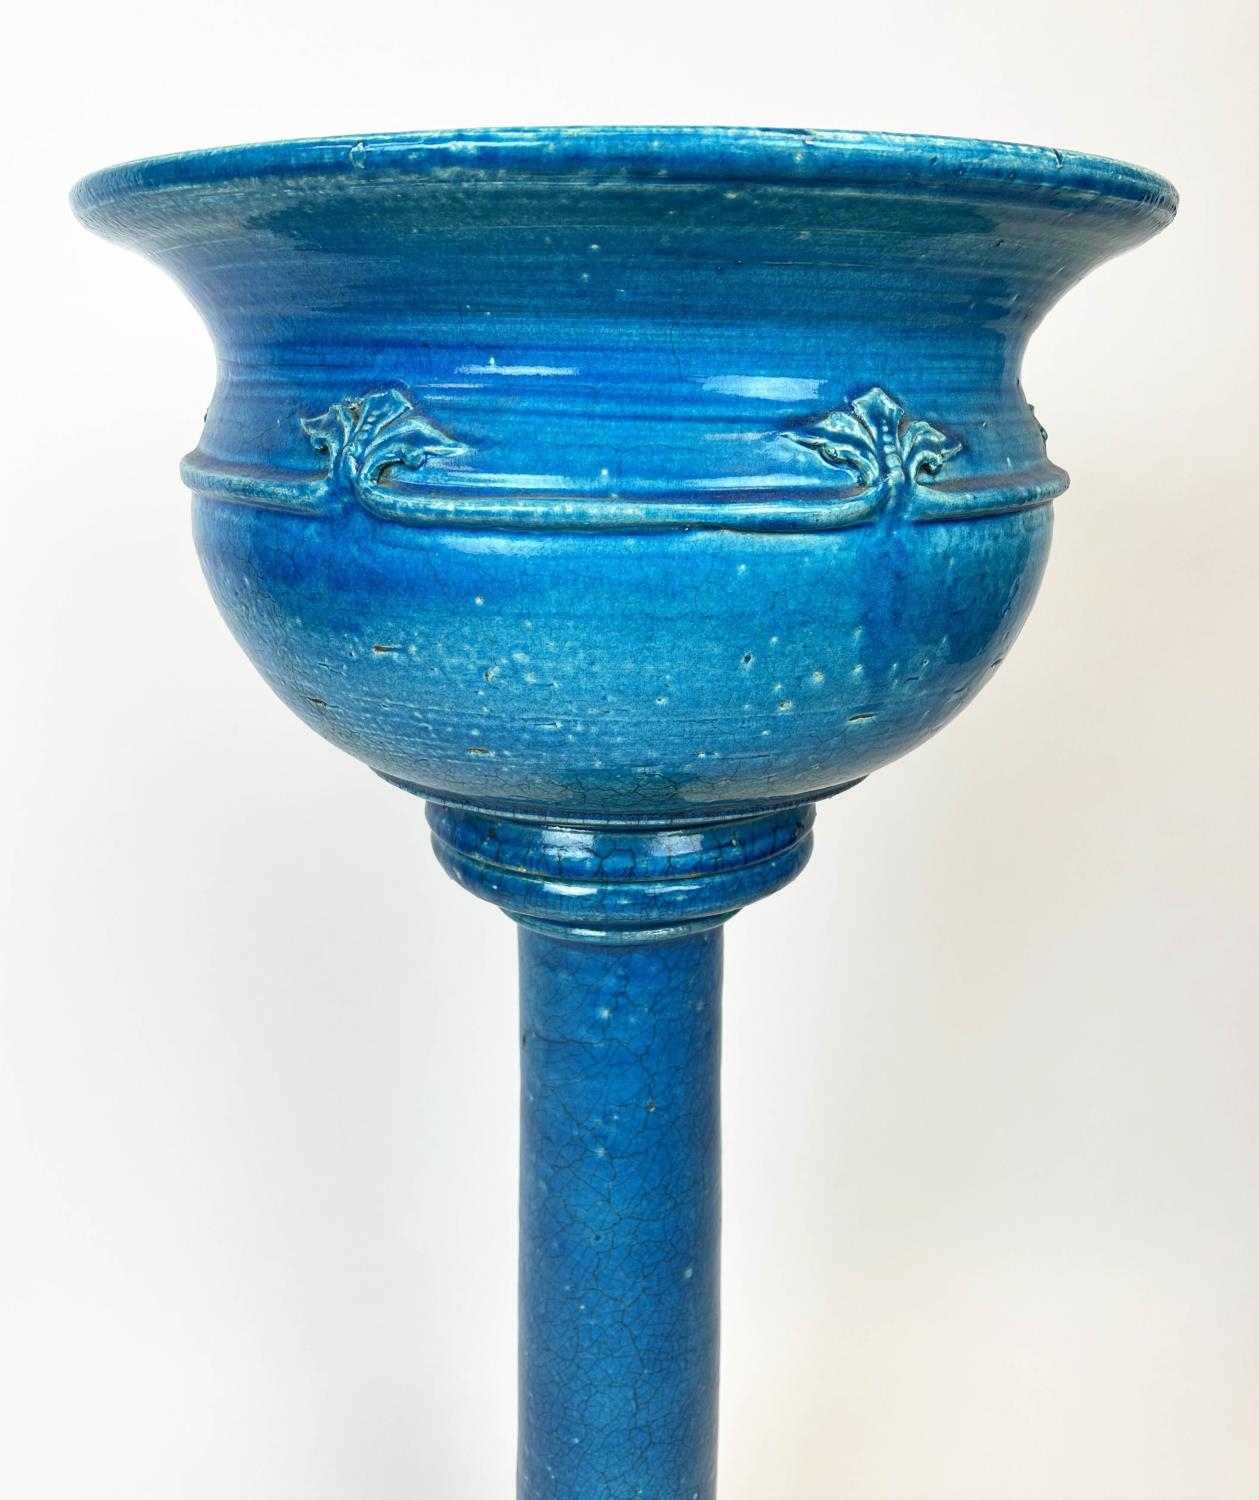 JARDINIERE ON STAND, Victorian style turquoise glazed ceramic, 102cm H. - Image 2 of 6